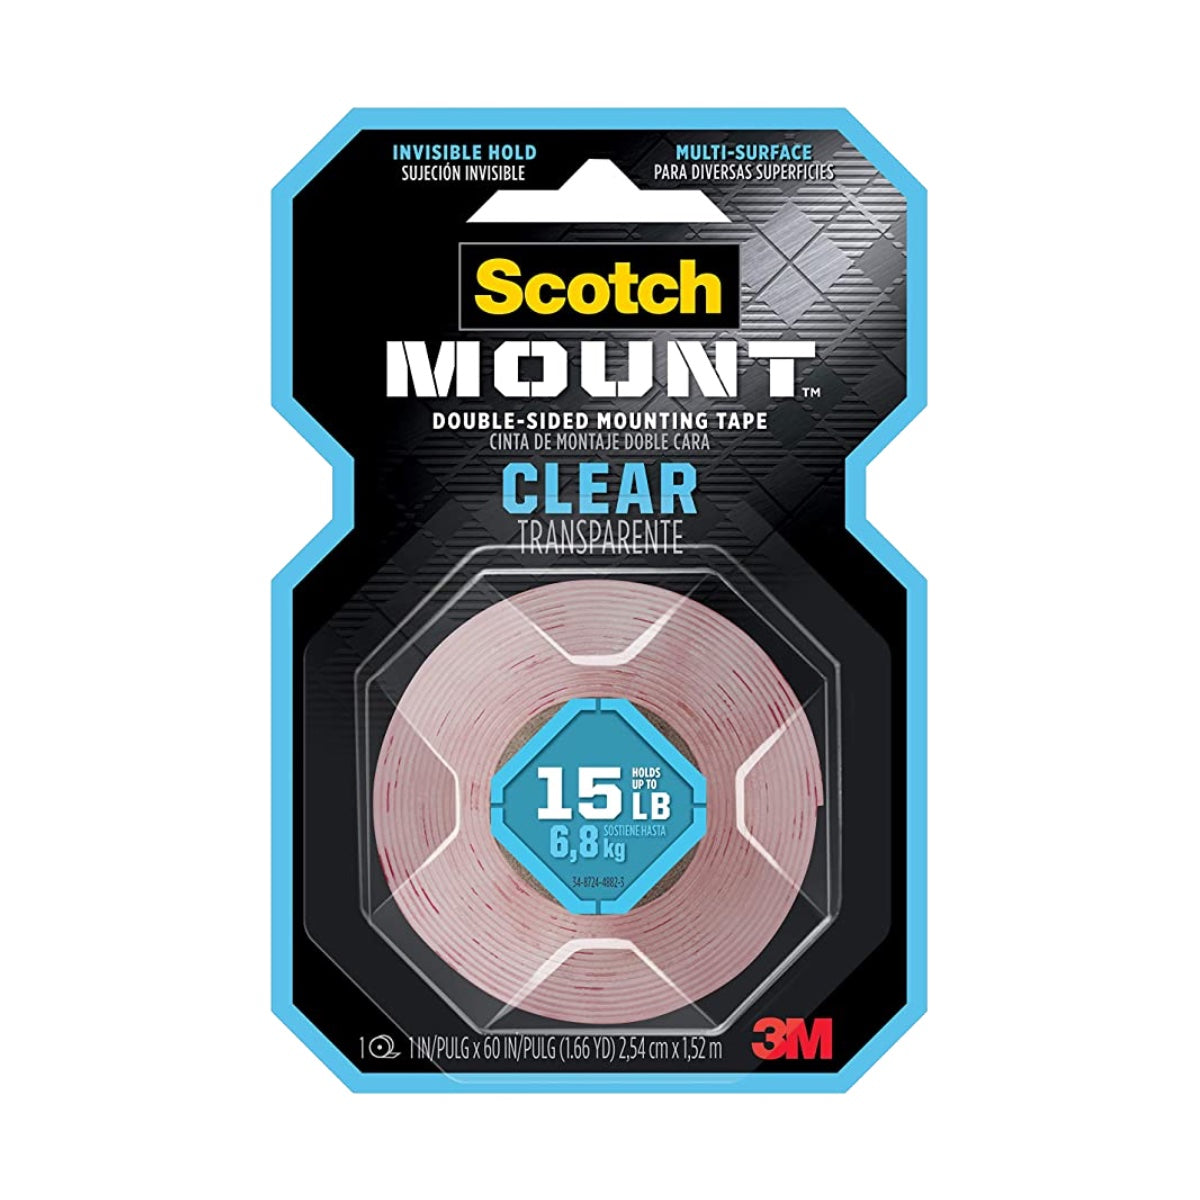 3M Scotch Clear Mounting Tape 410P, Heavy Duty, 1 x 60 inches